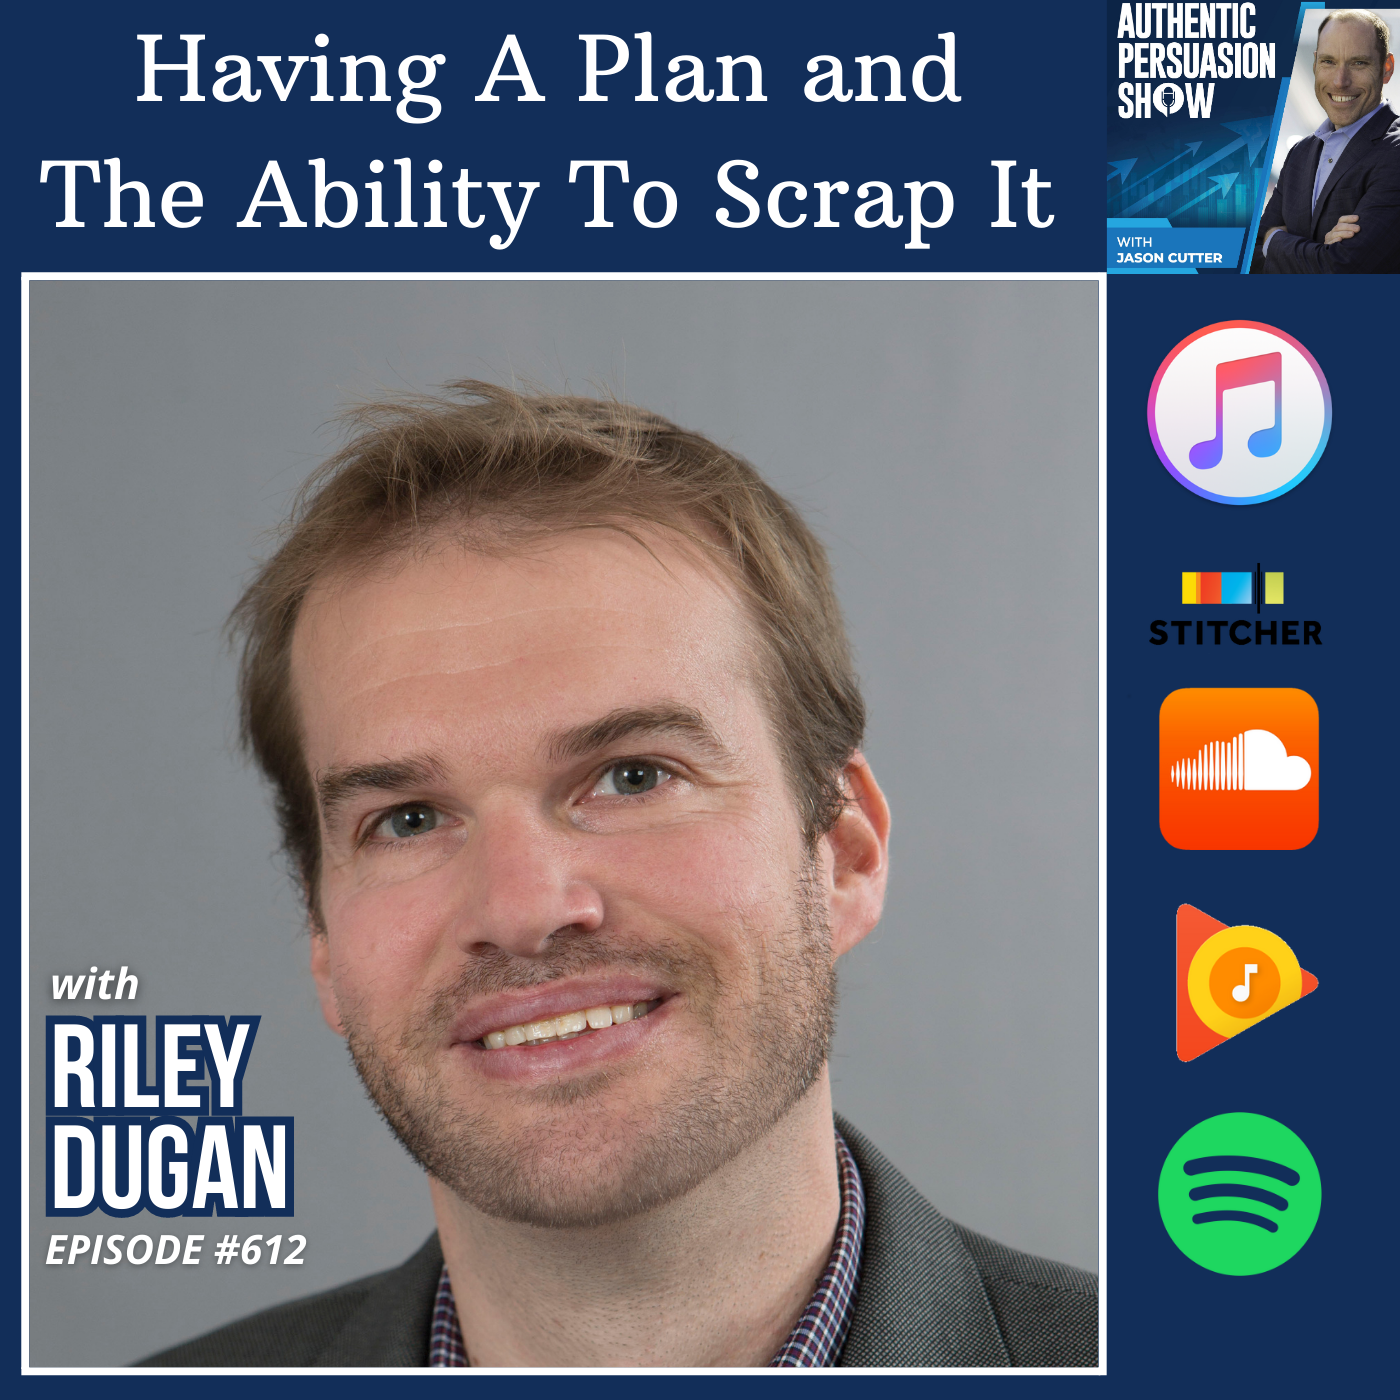 [612] Having a Plan and the Ability to Scrap it, with Dr. Riley Dugan from the University of Dayton